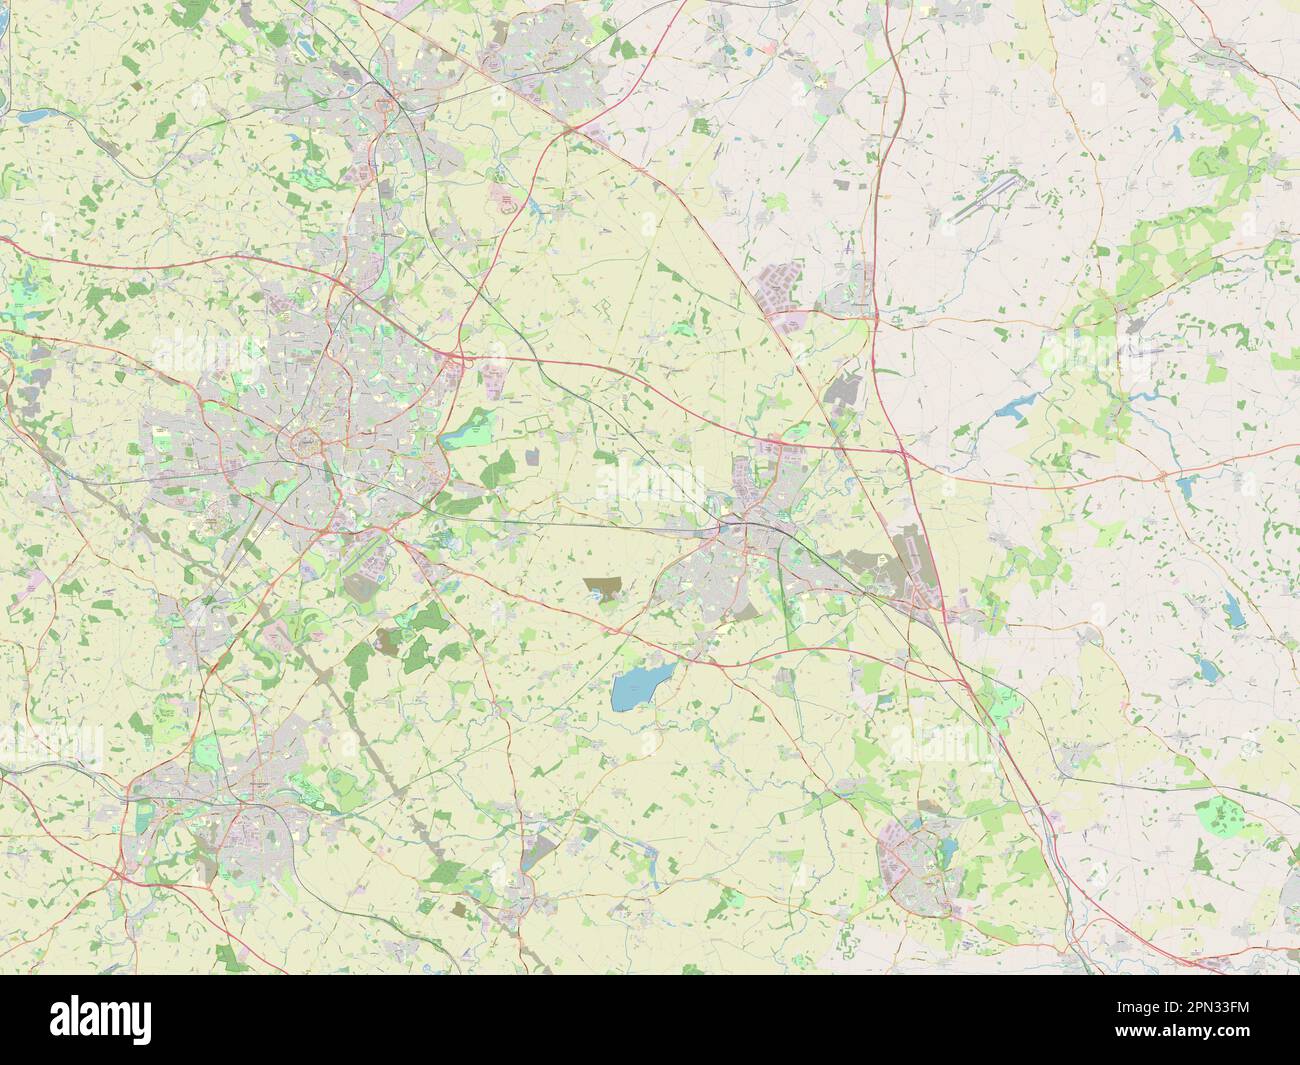 Rugby, non metropolitan district of England - Great Britain. Open Street Map Stock Photo